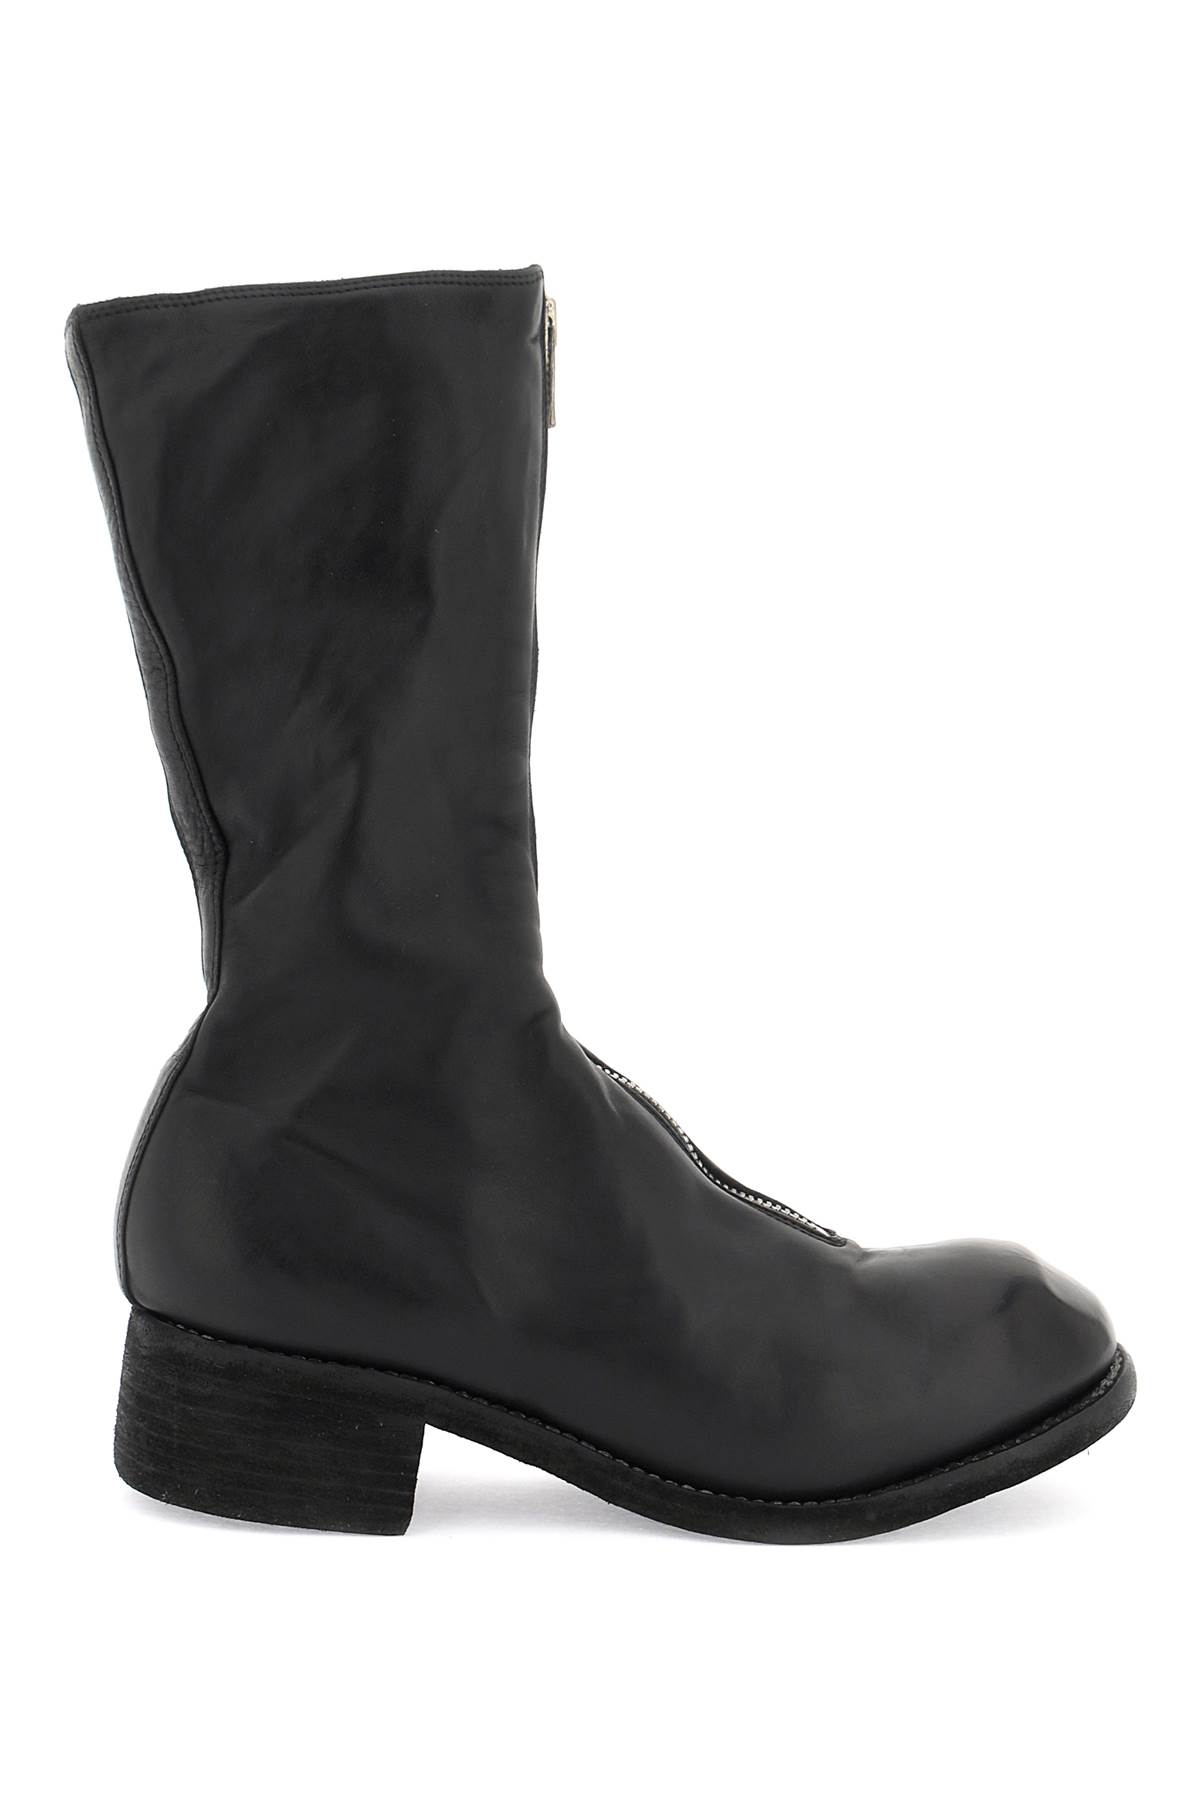 Front Zip Leather Boots